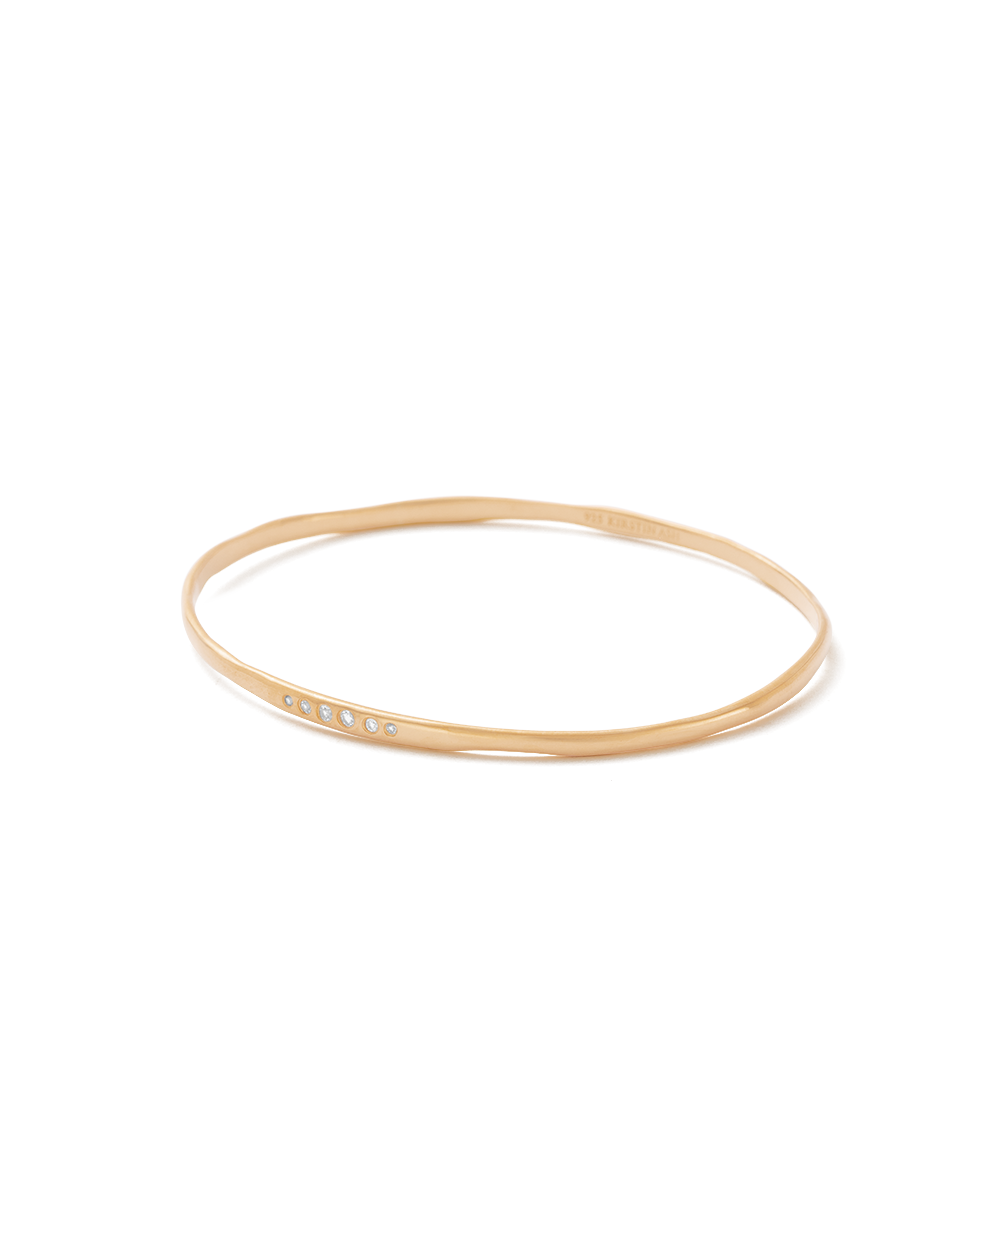 SUN LINES BANGLE (18K GOLD PLATED)